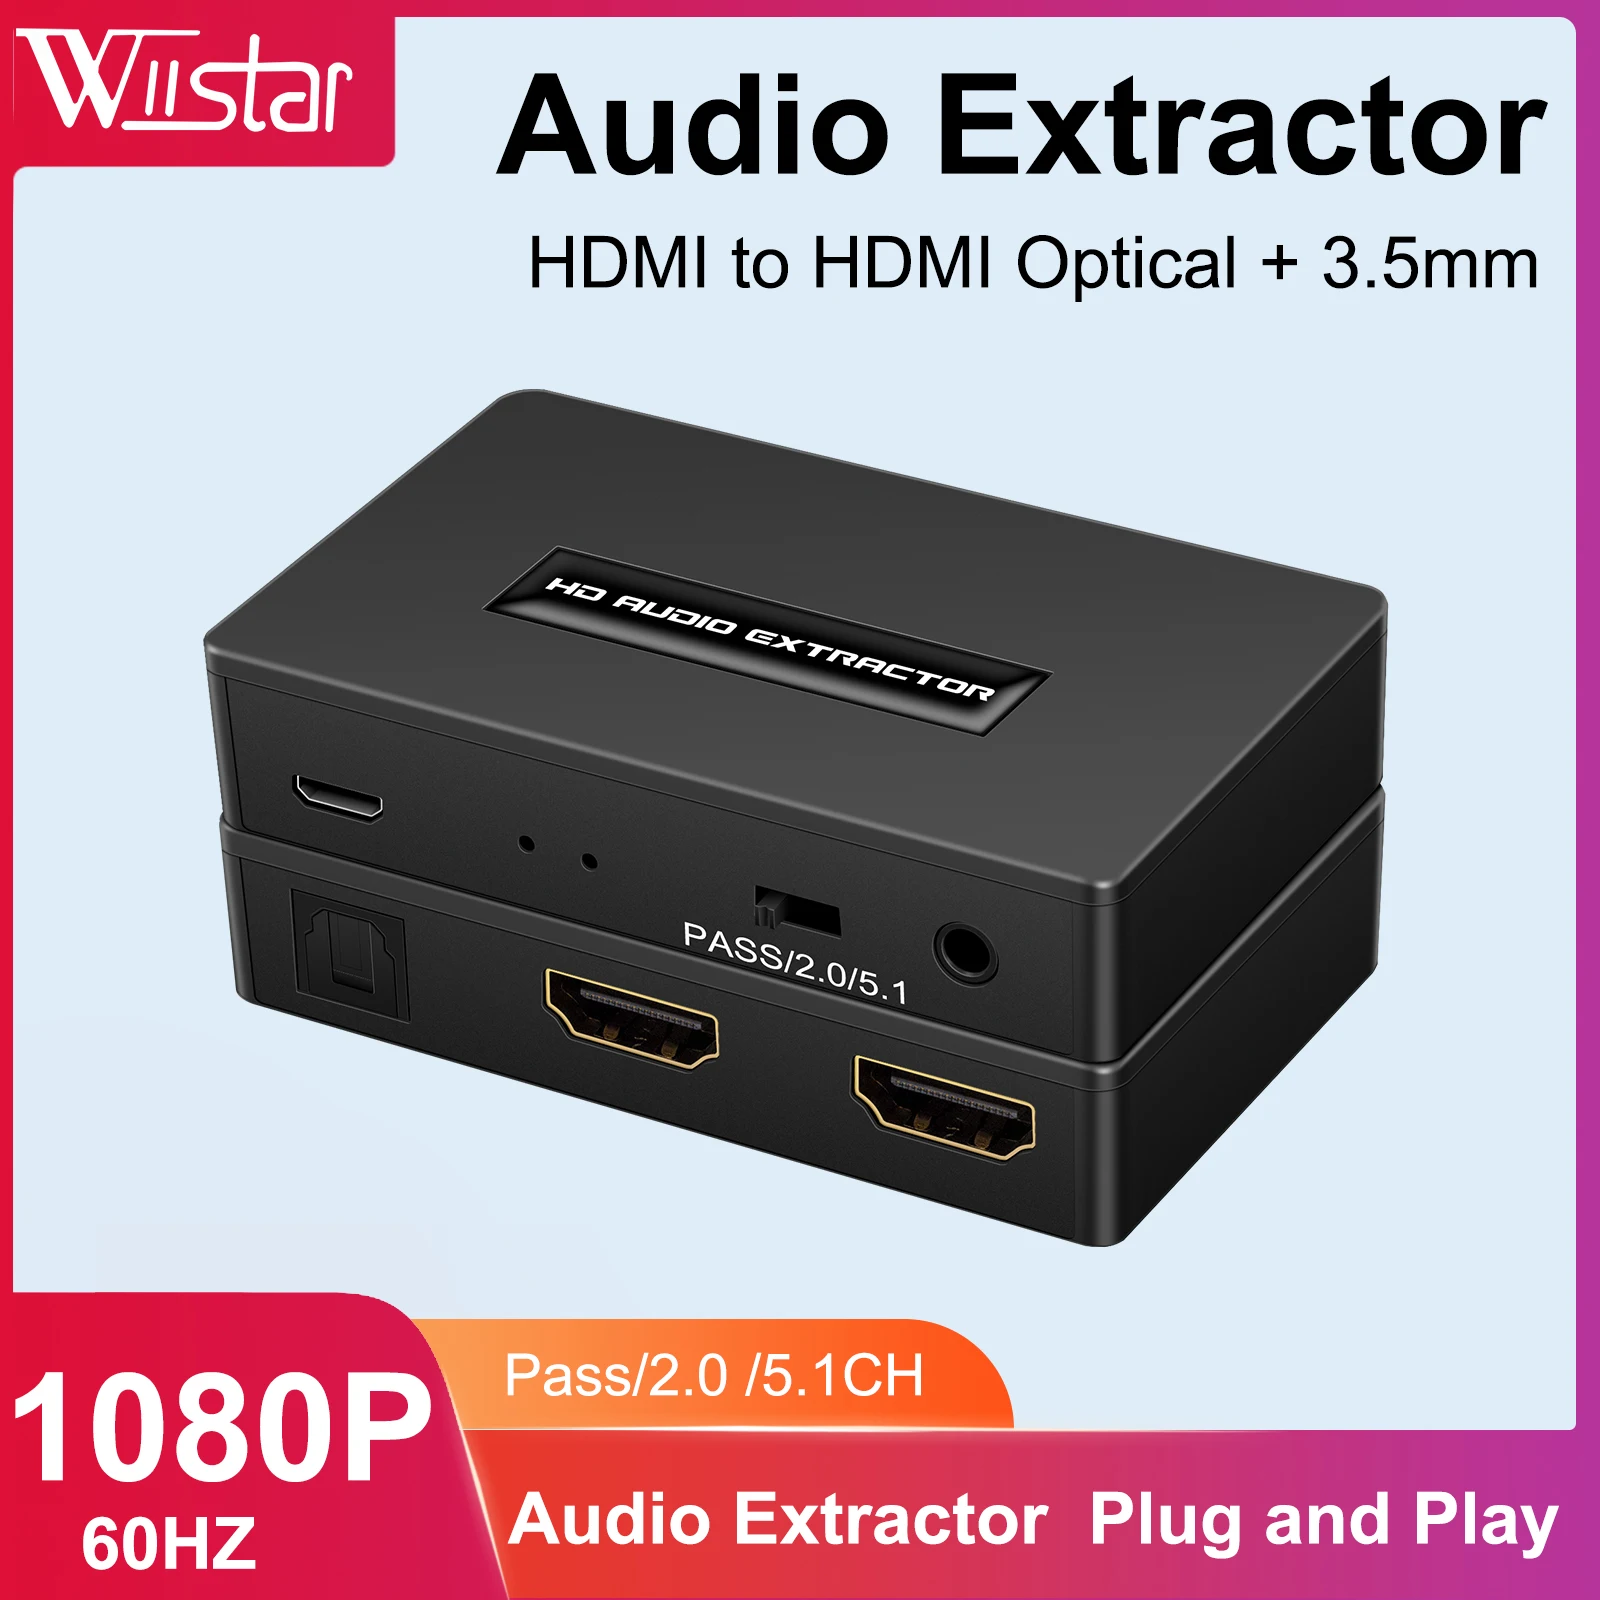 HDMI-compatible Audio Extractor HDMI to HDMI Optical TOSLINK SPDIF + 3.5mm Stereo Extractor Audio Splitter with usb cable 4k x 2k video audio extractor hdmi compatible to 3 5mm audio converter spdif optical toslink stereo out splitter adapter